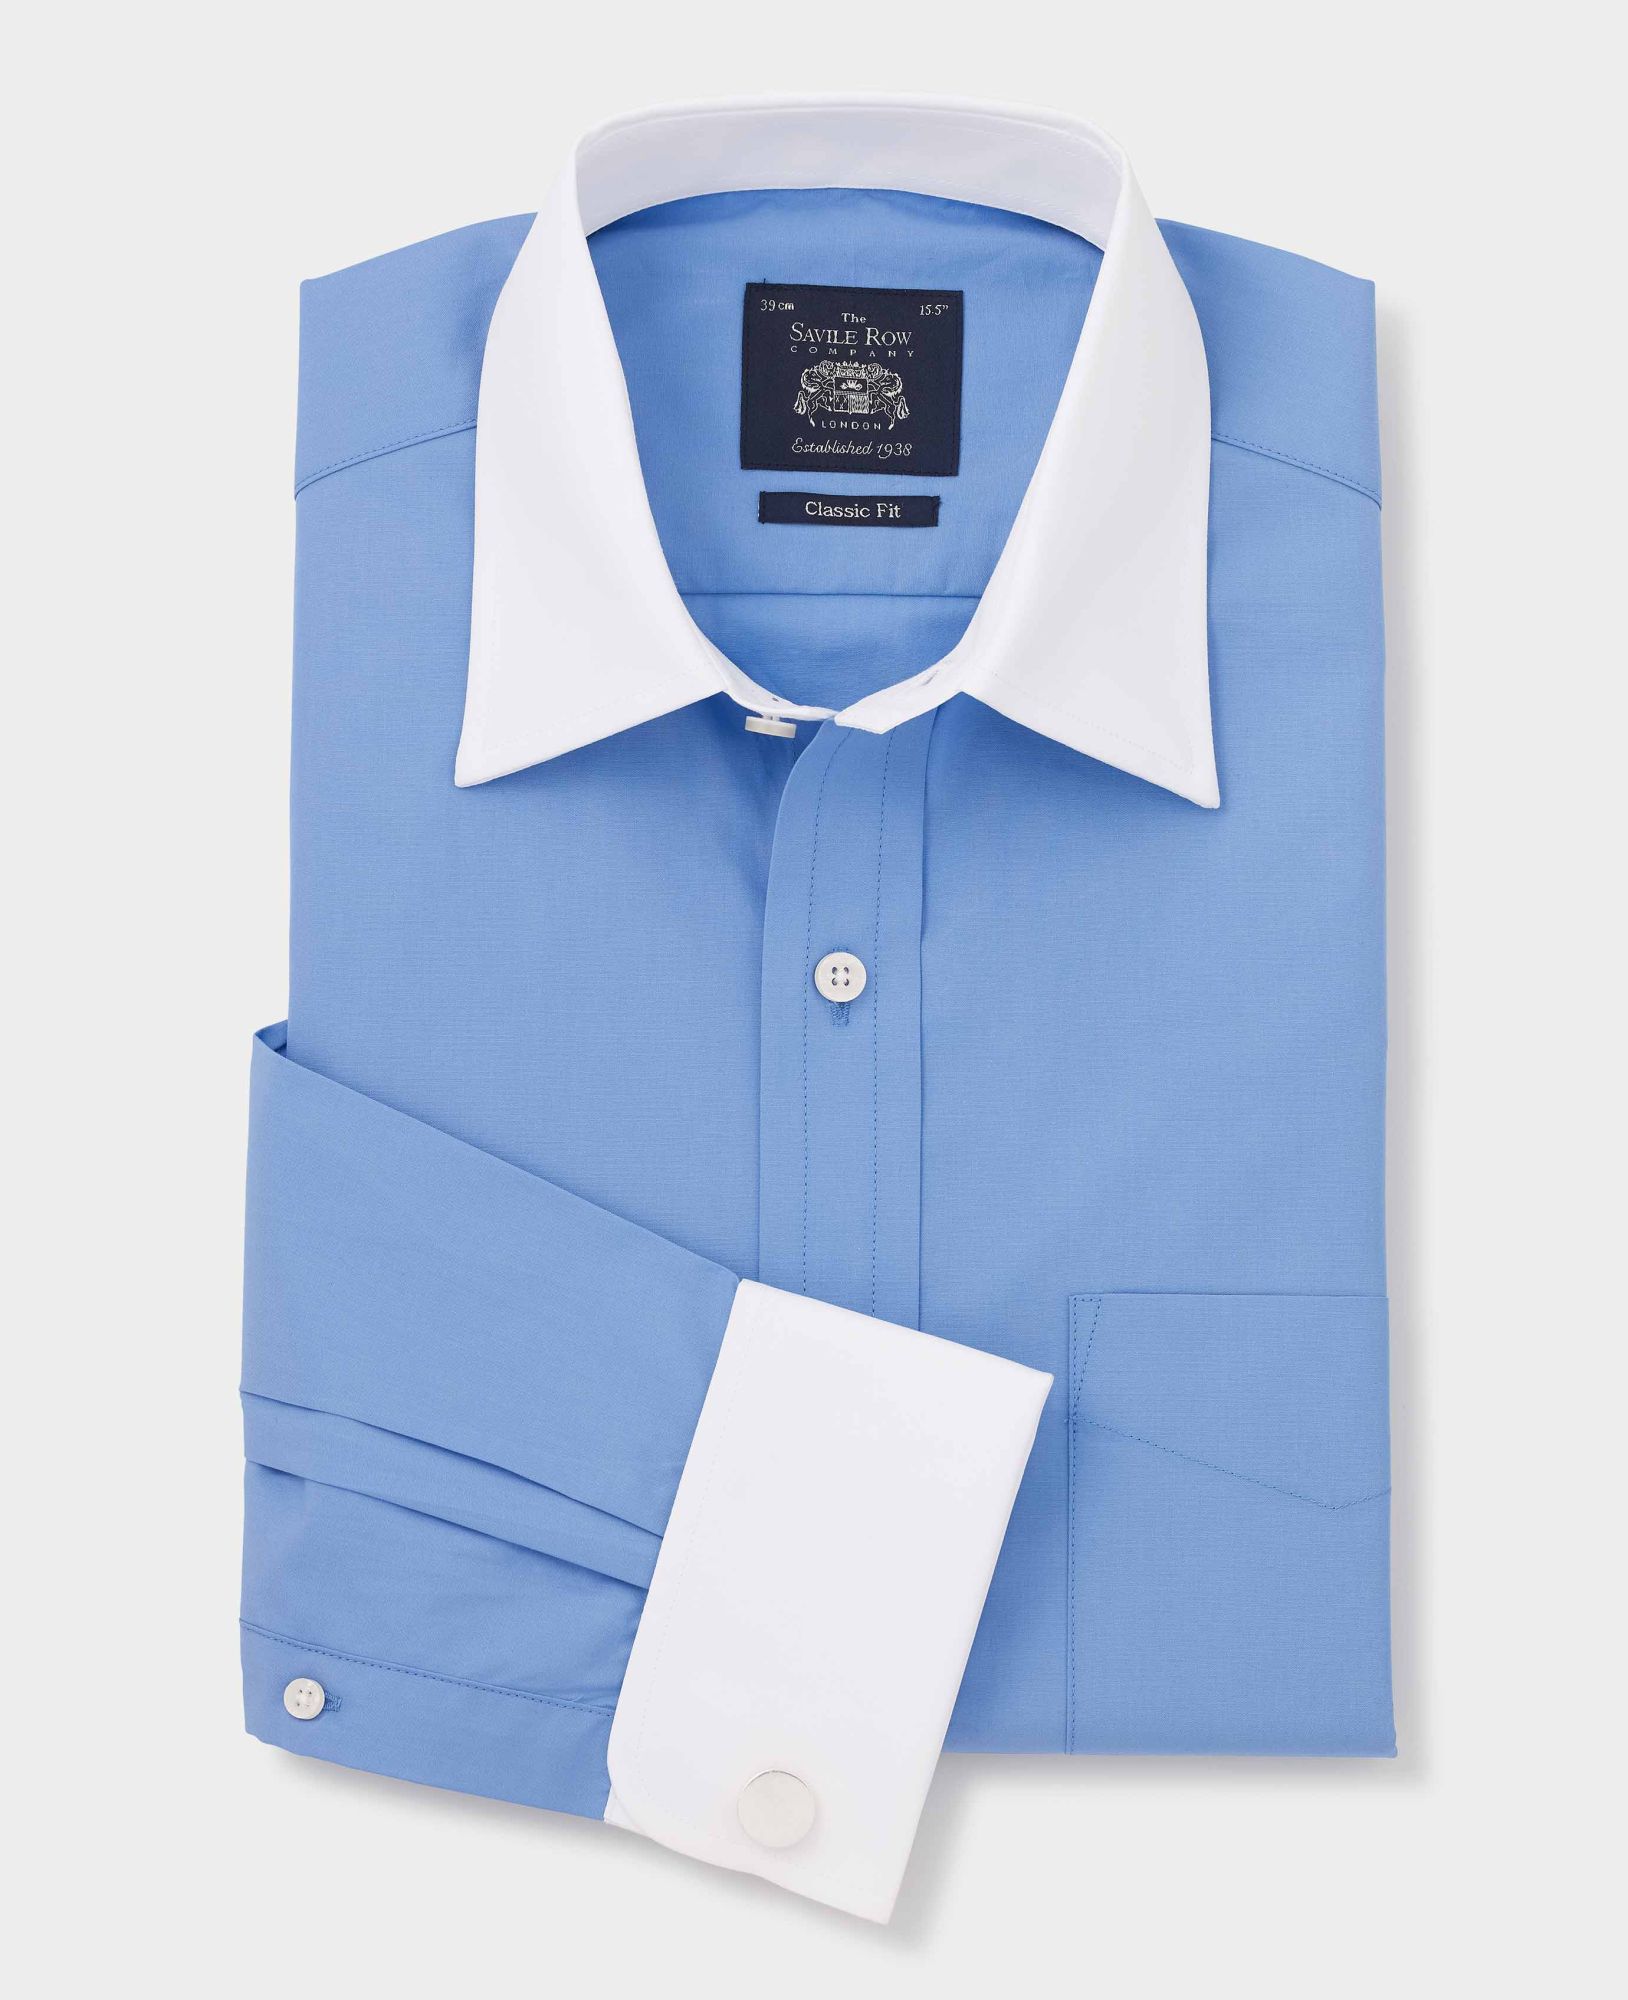 French Blue Classic Fit Shirt With White Collar & Cuffs 18